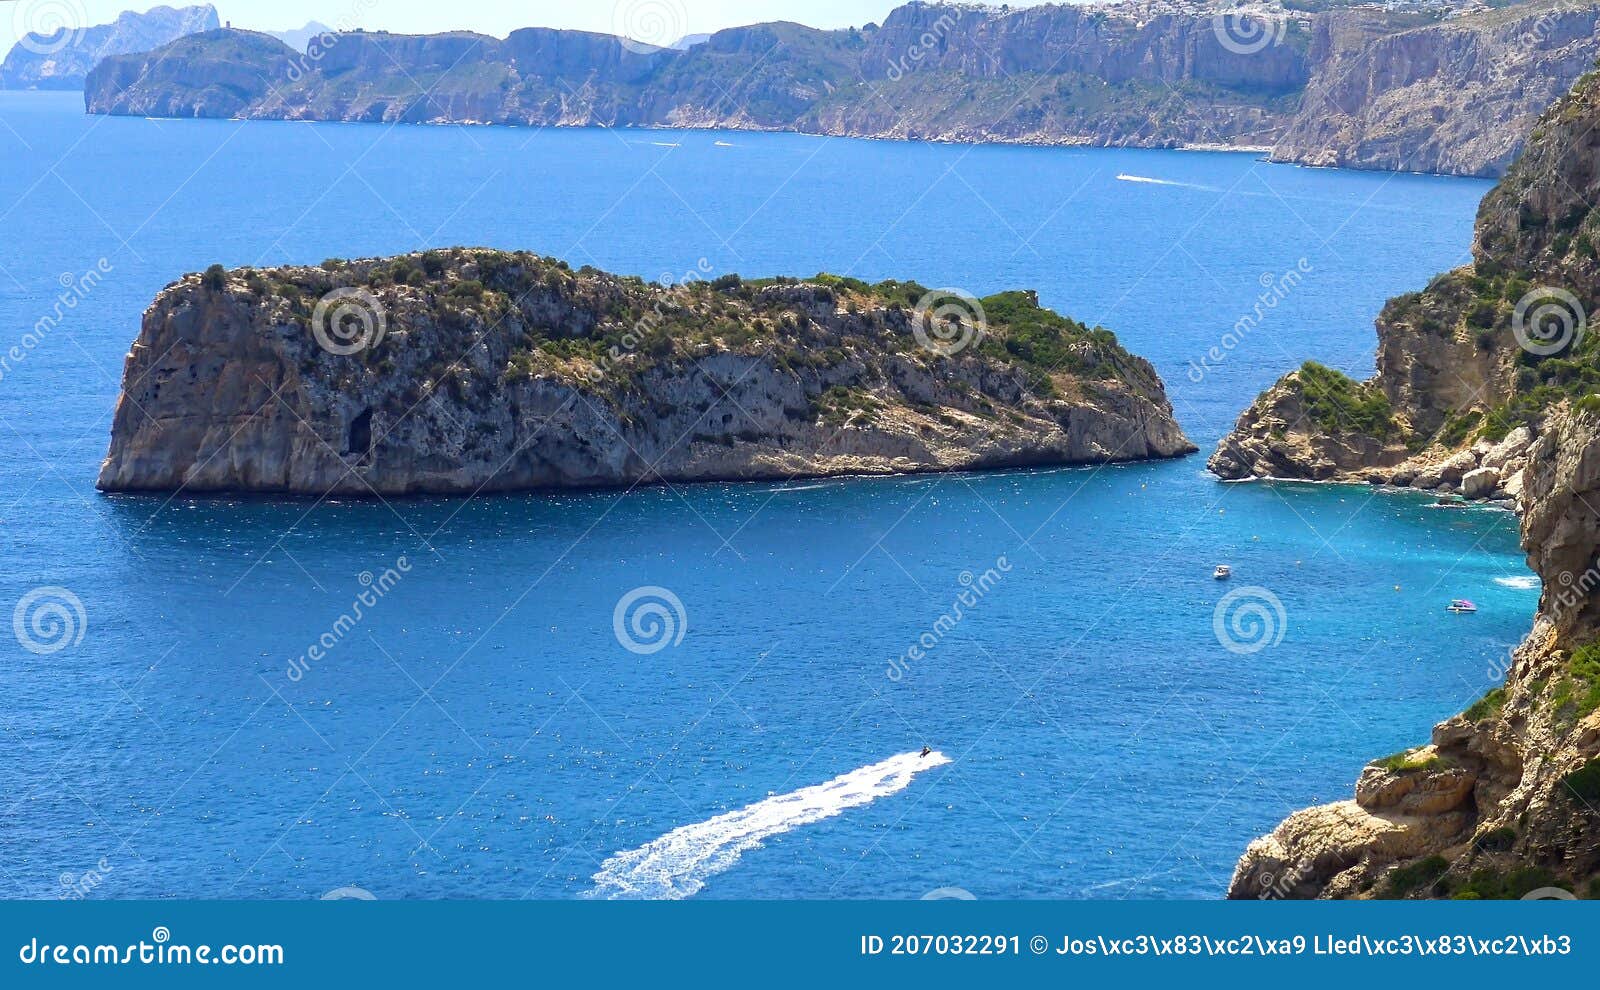 aerial view of the coastline of javea with the little descubridor islet.